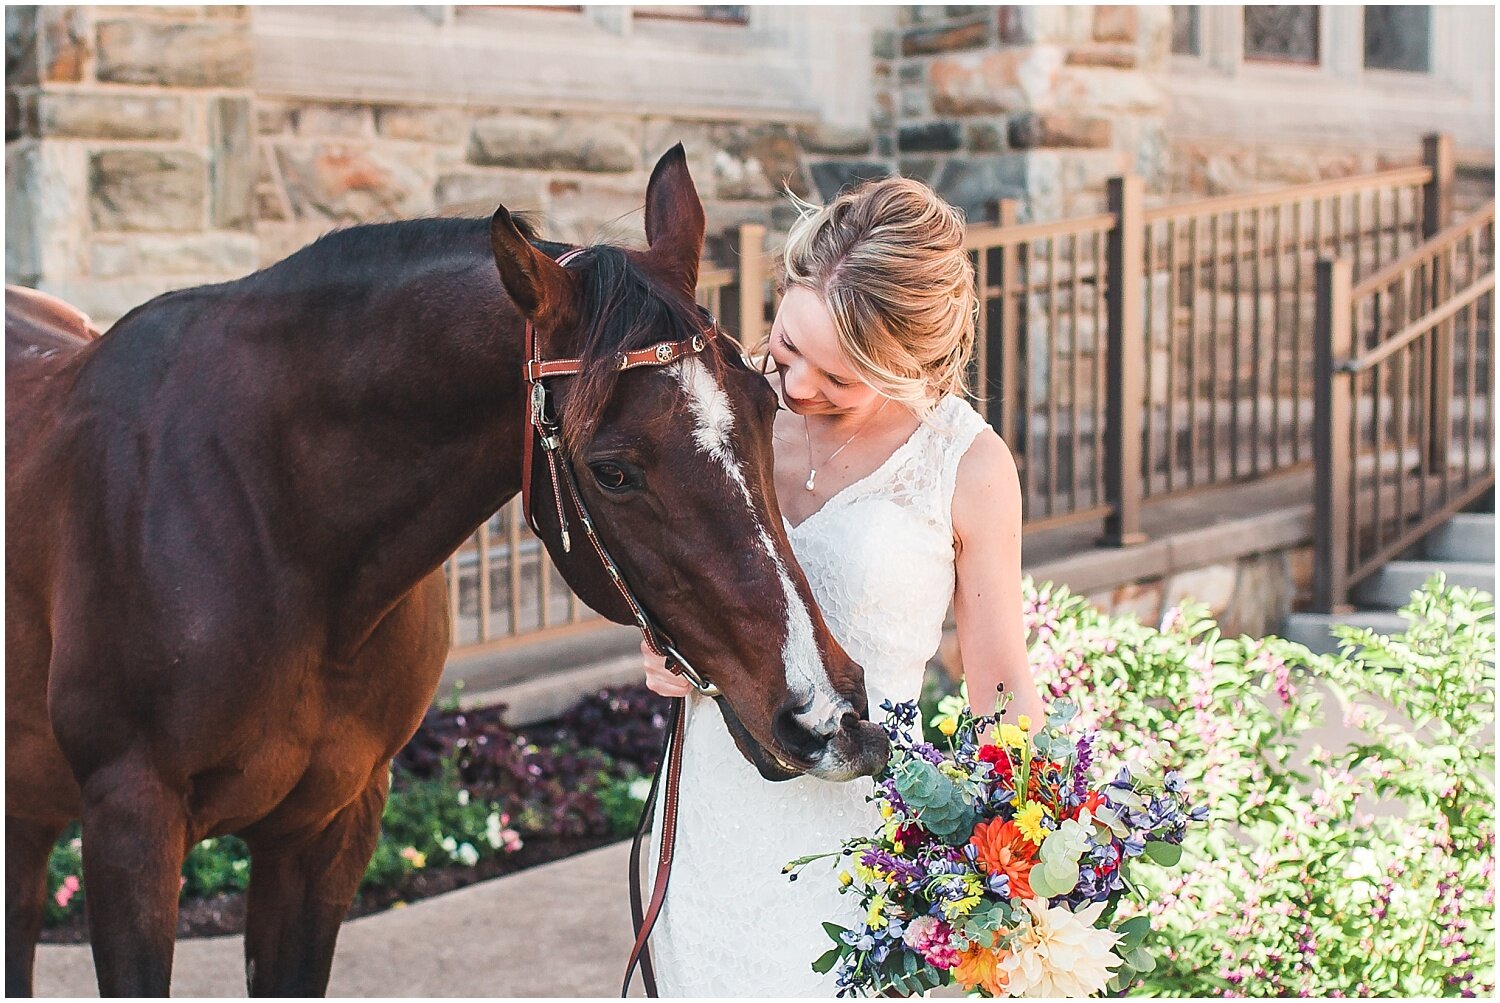 Lancaster PA fall wedding, bride with horse, horse eats flowers